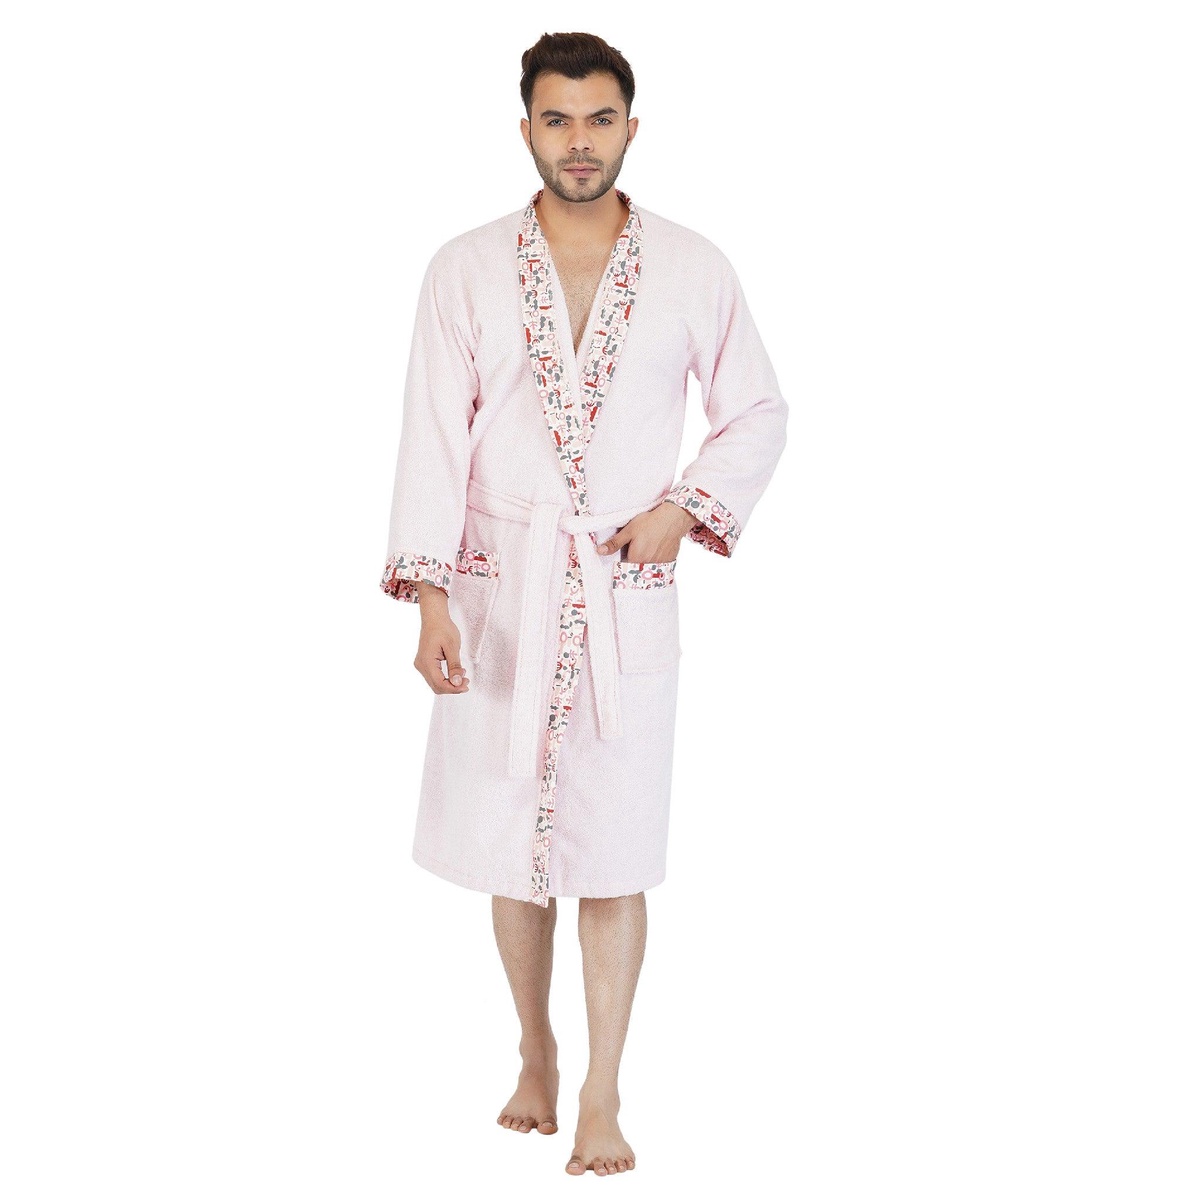 Step Up Your Self-Care Game: Luxurious Men's Bathrobes for Relaxing Moments